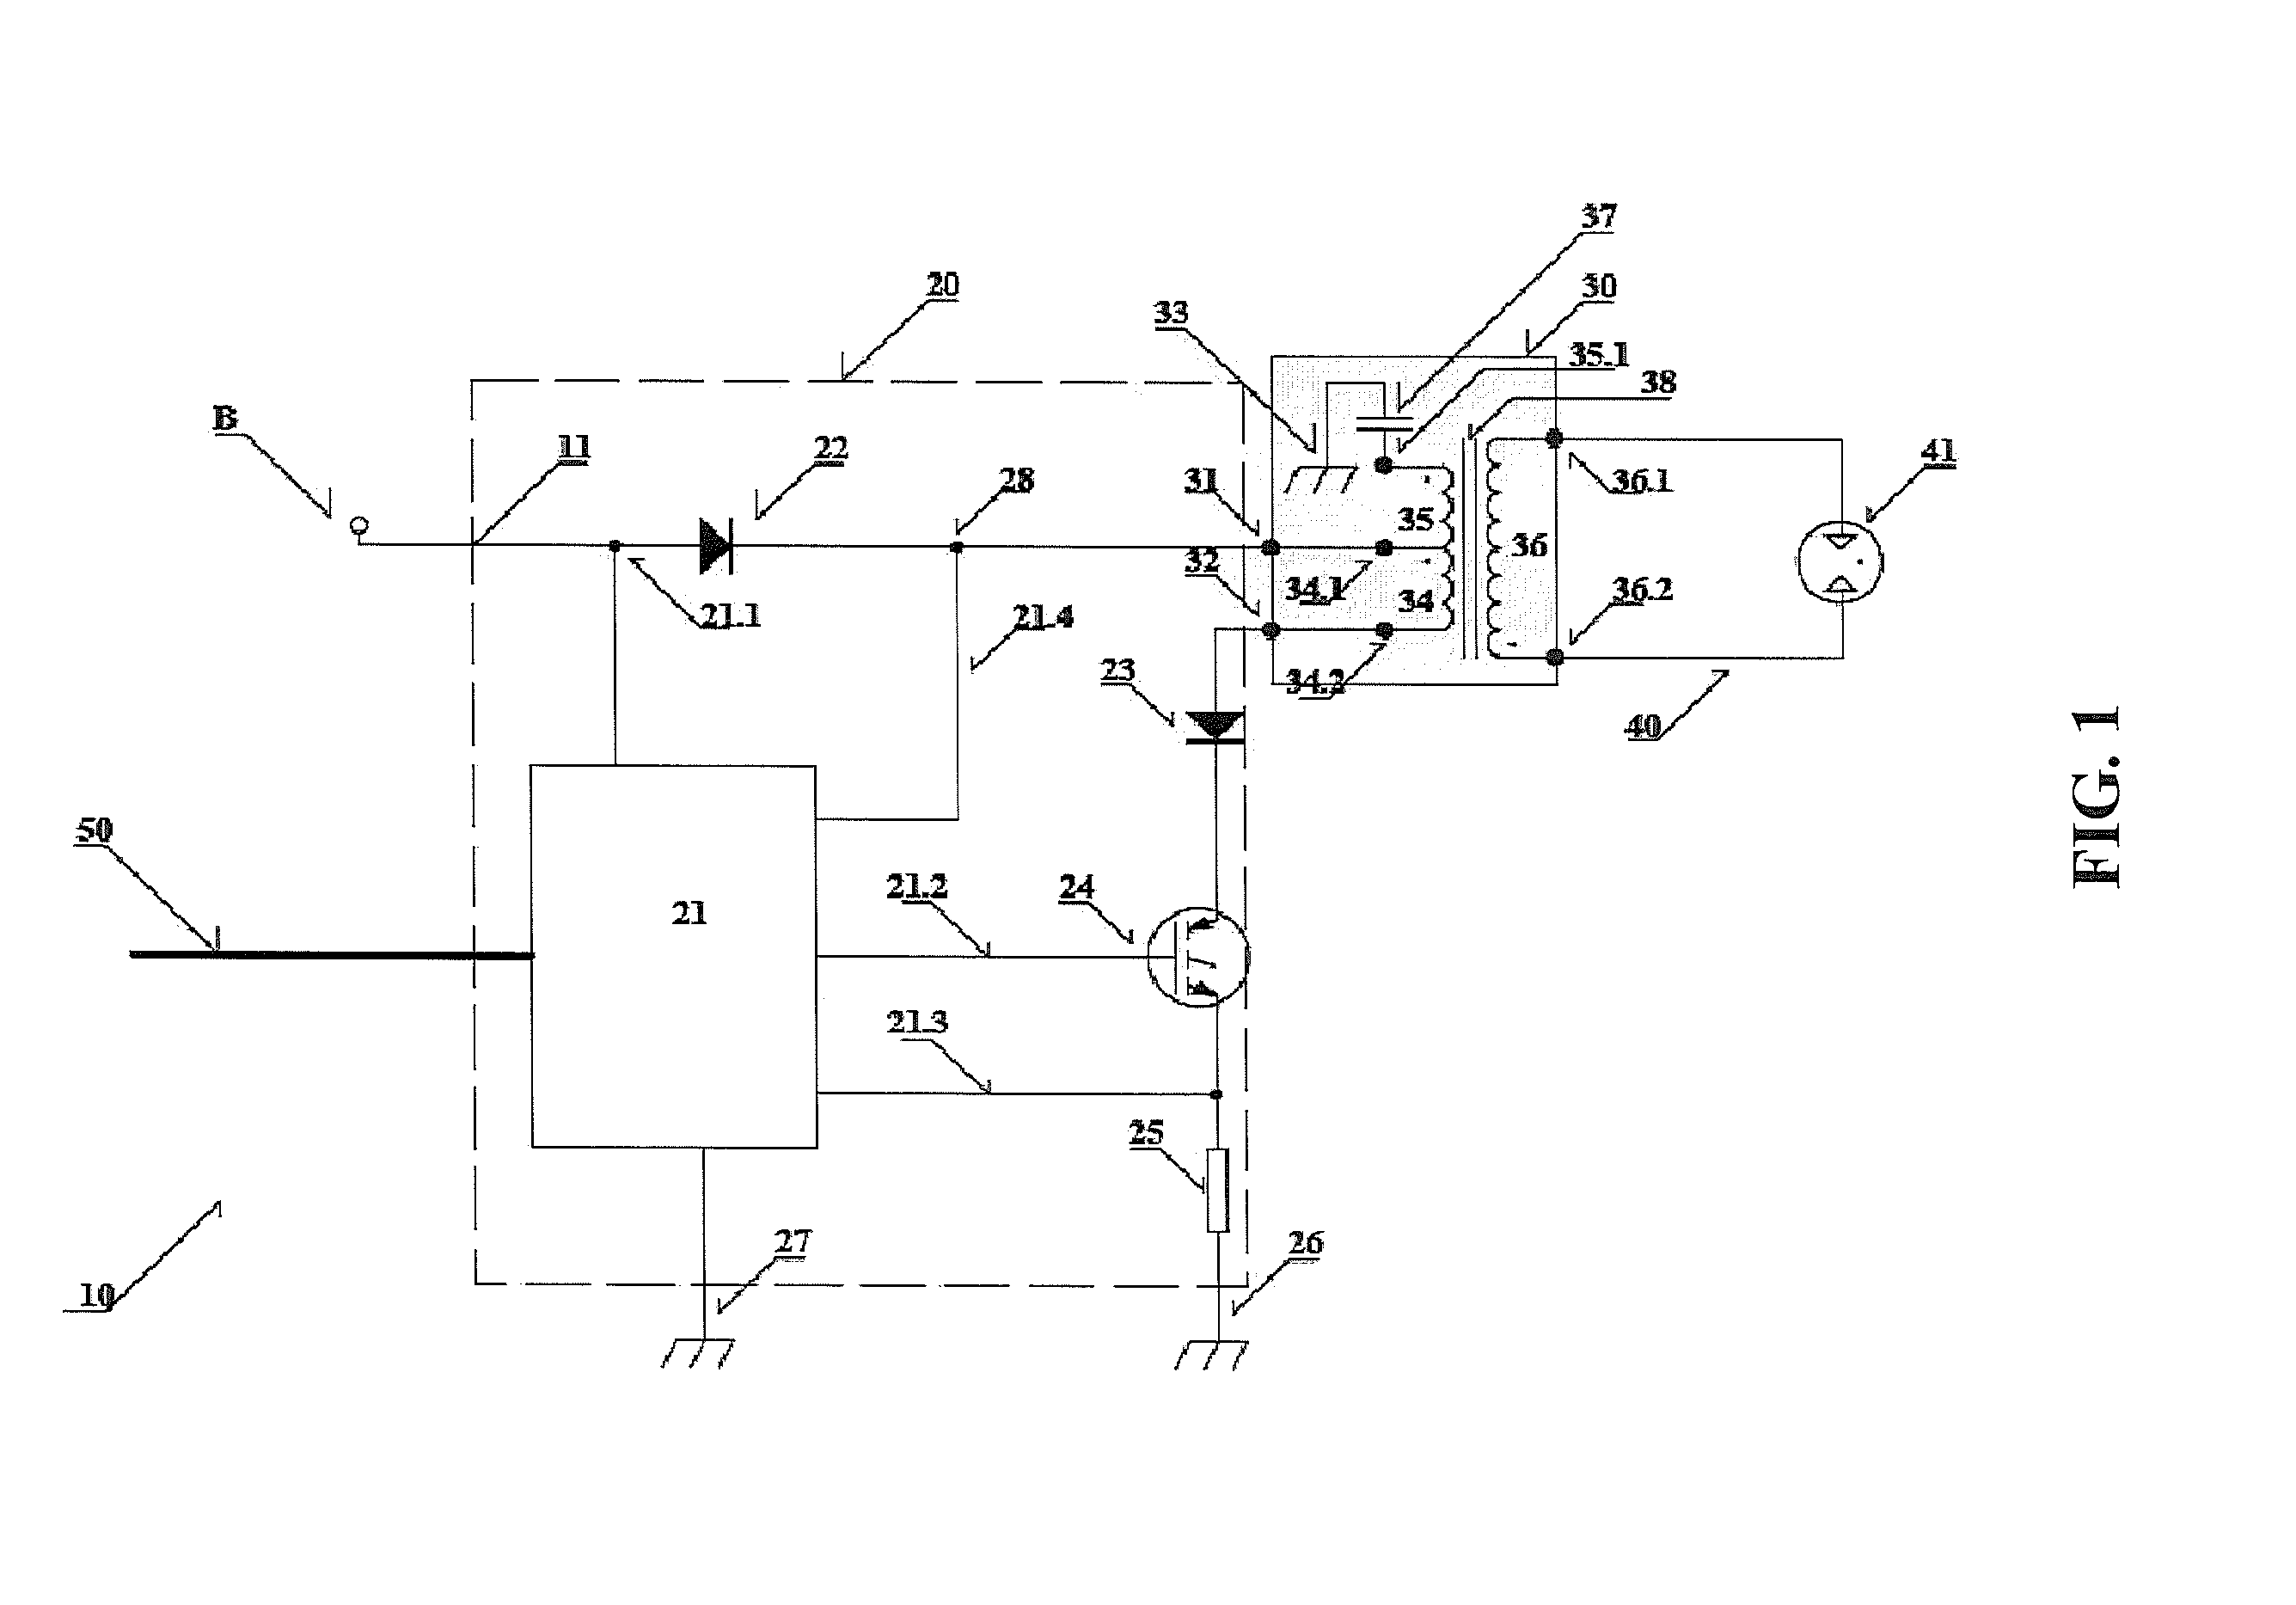 Plasma ignition device for internal combustion engines